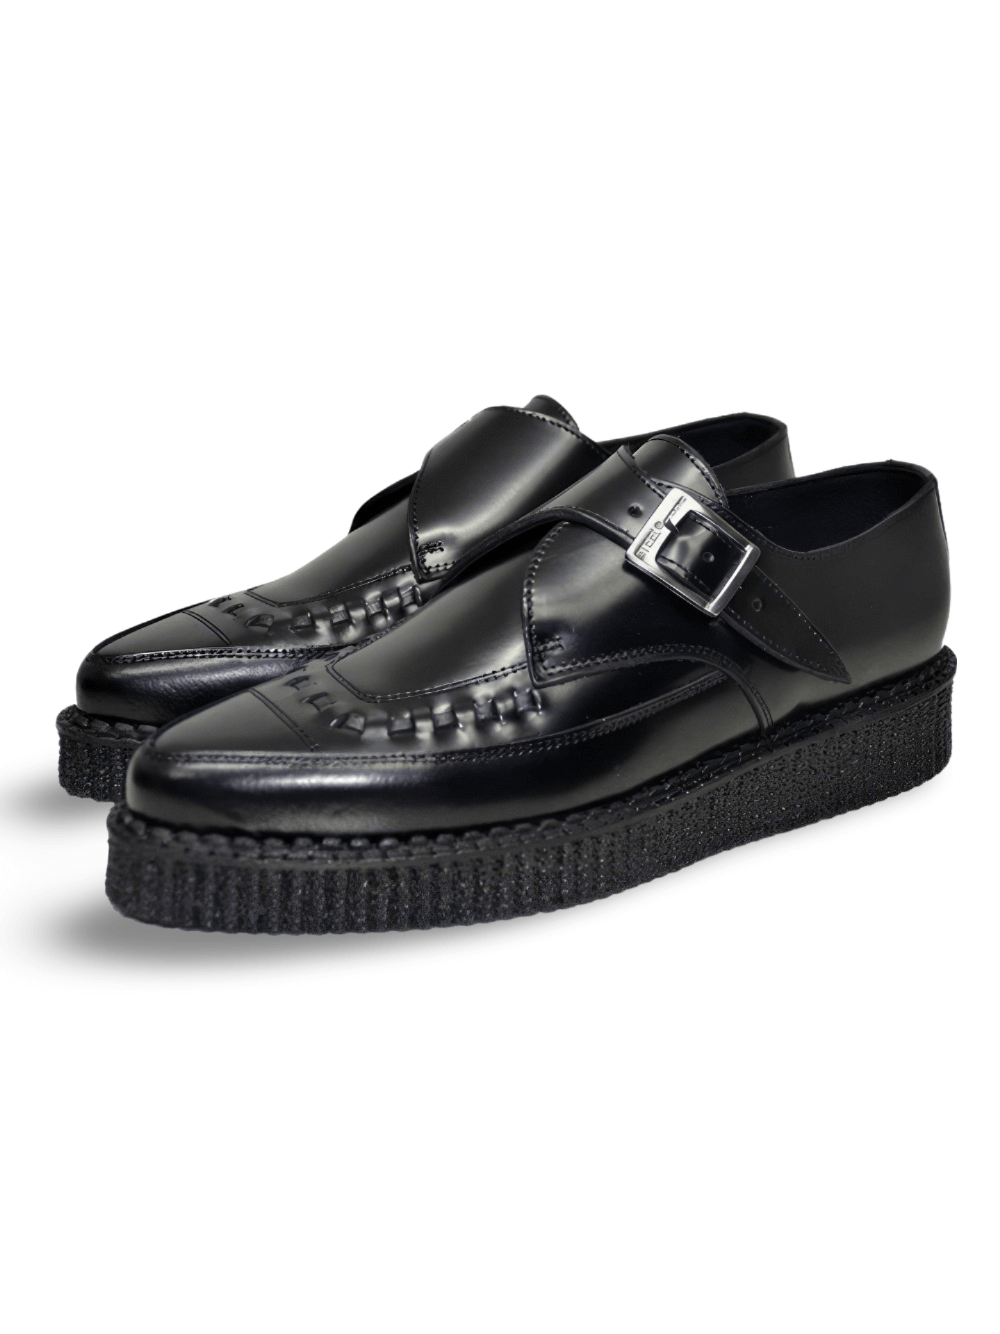 Unisex Pointed Creeper Shoe with Buckle Closure